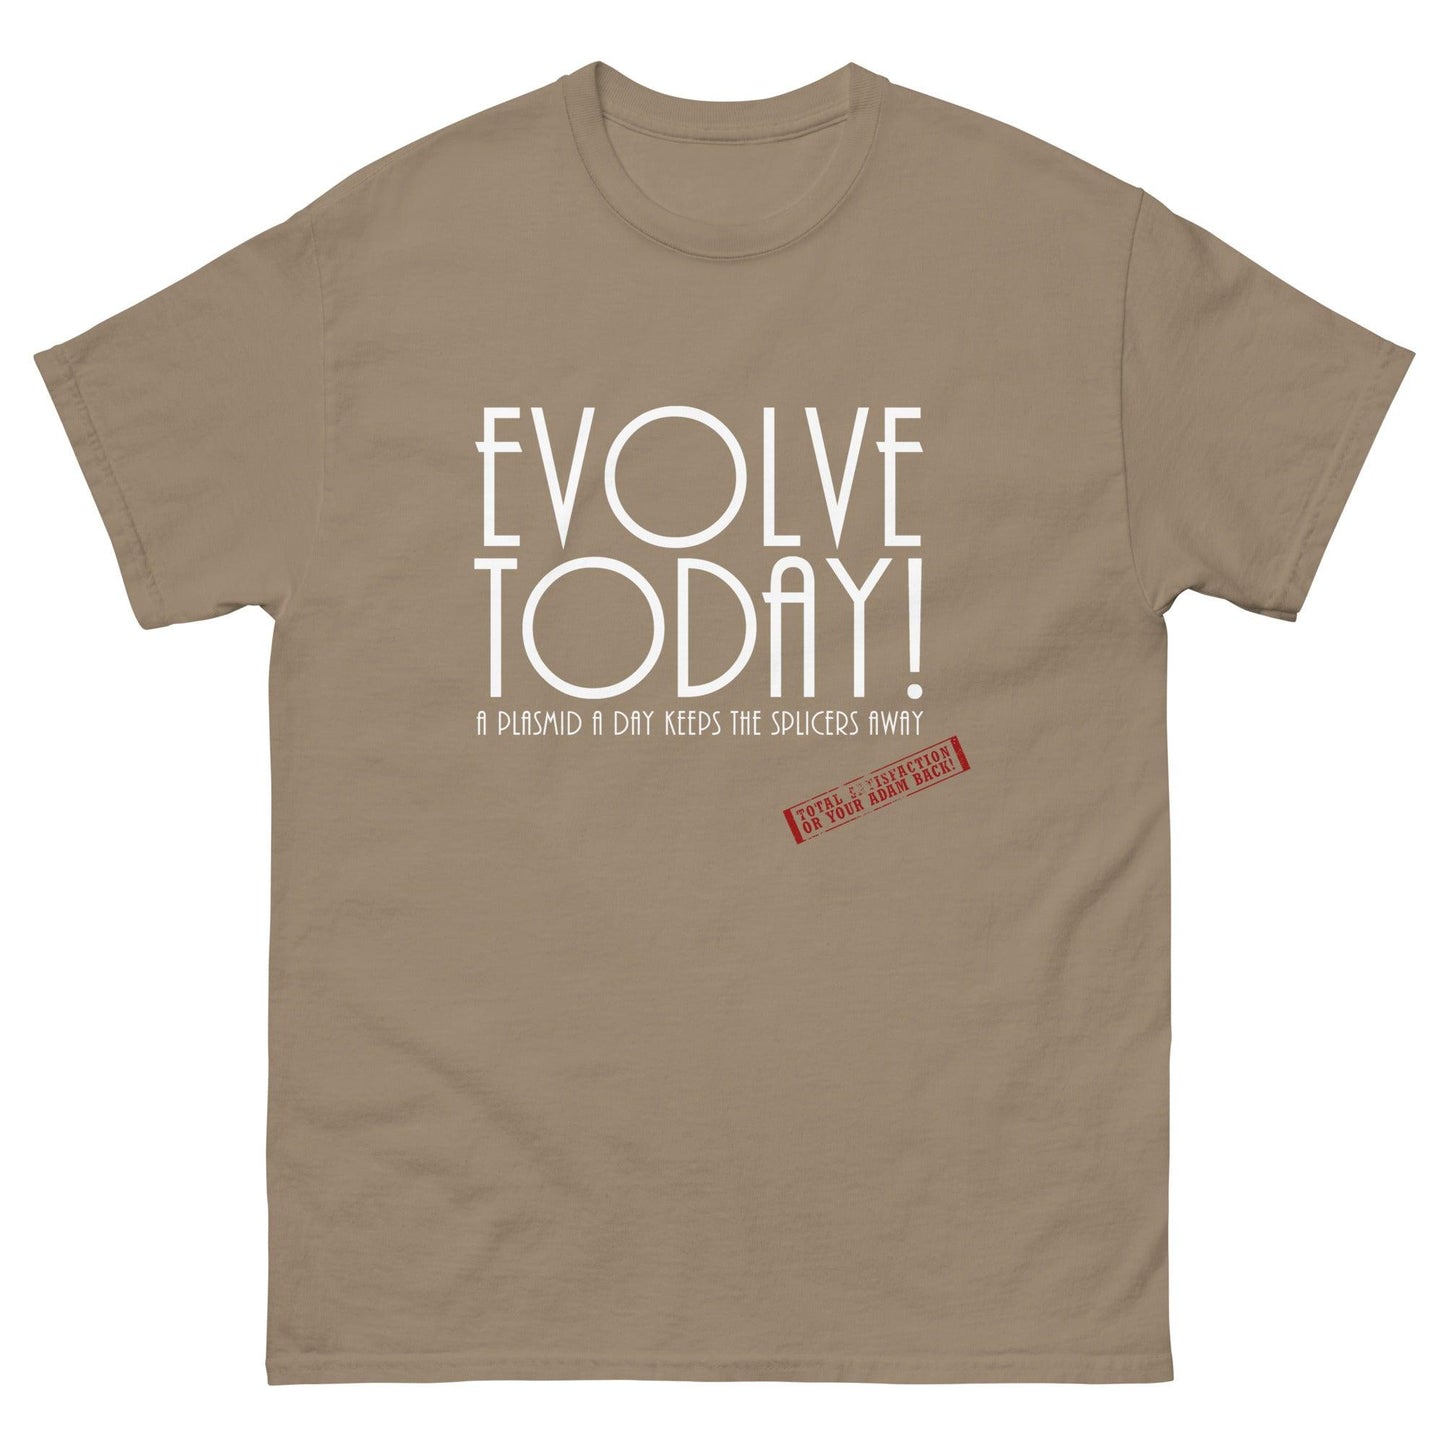 Evolve Today! Tee - Level Up Gamer Wear